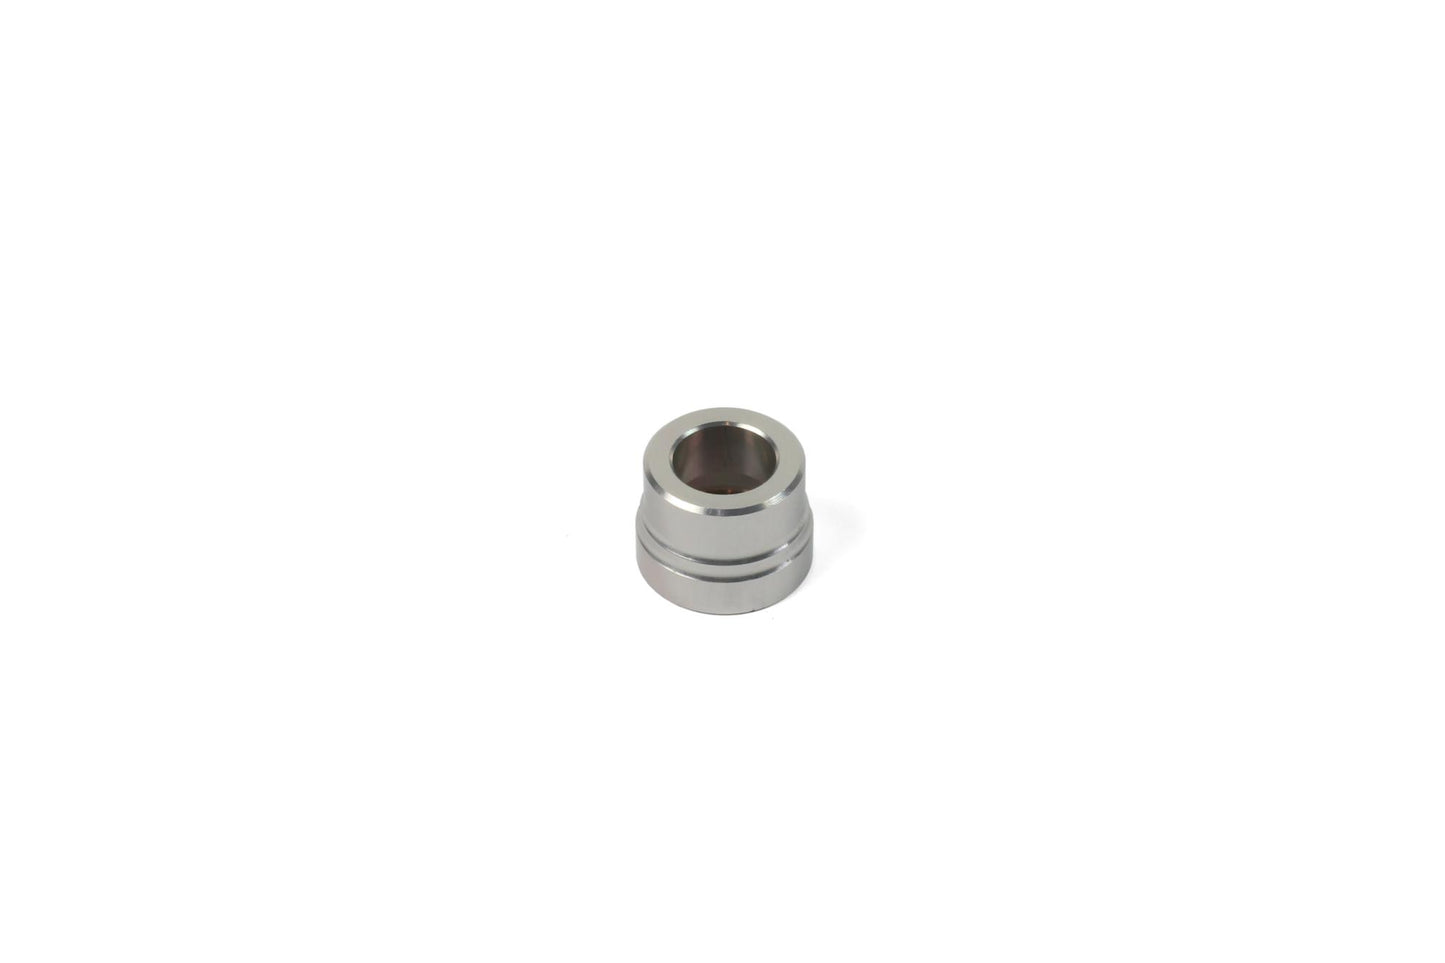 Hope Pro 4 12mm Scs Drive-Side Spacer - Silver